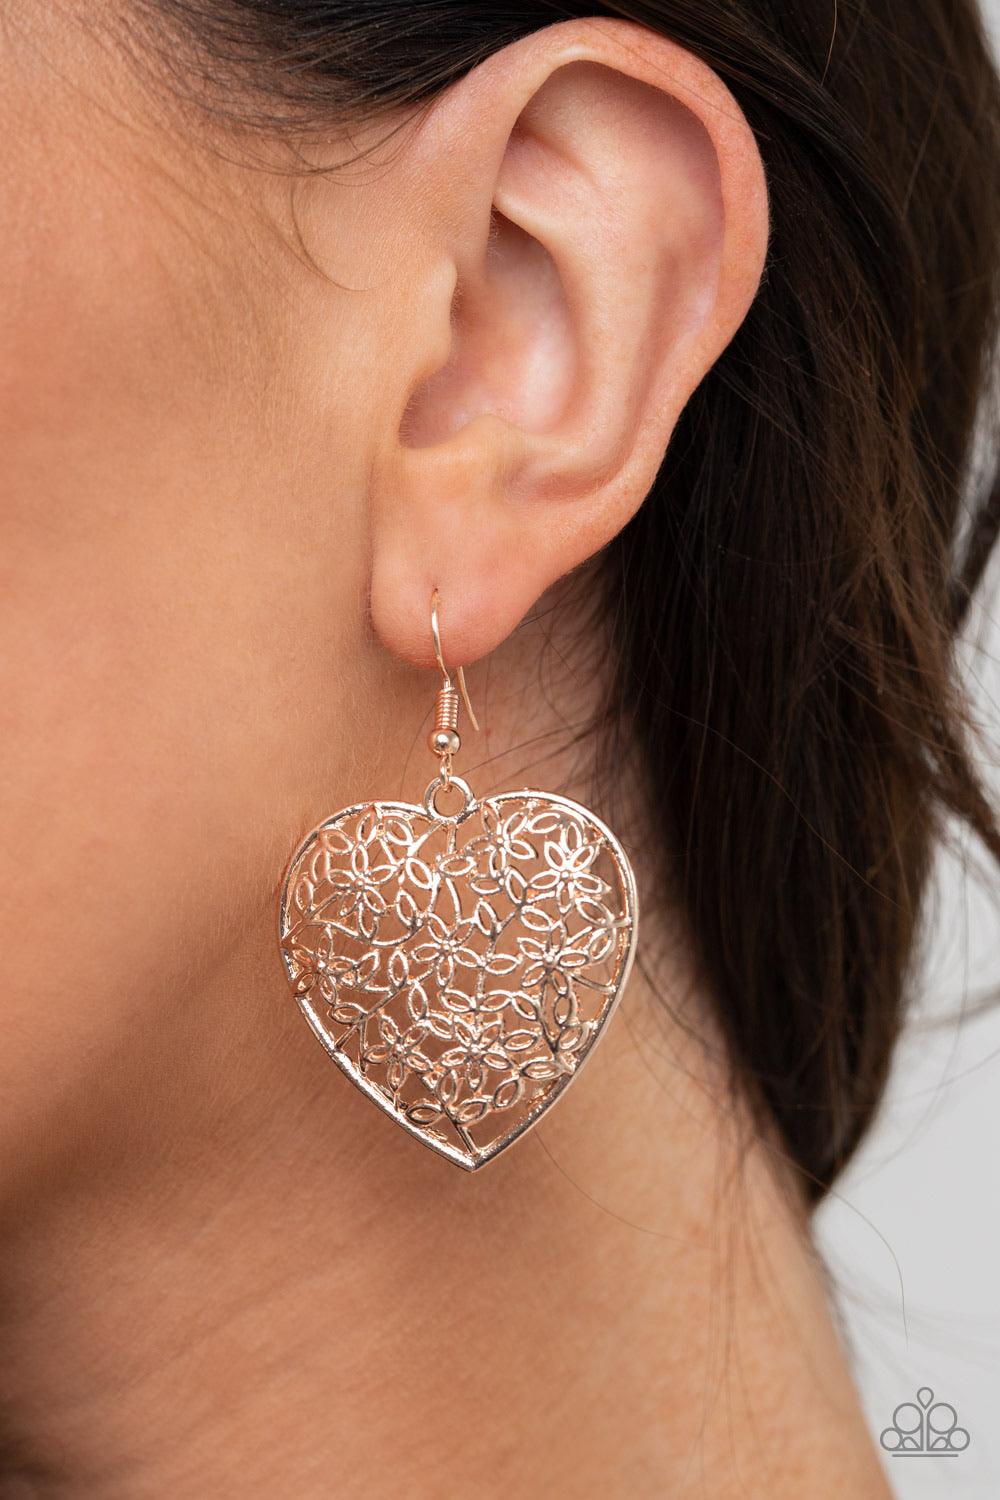 Let Your Heart Grow ~Rose Gold - Beautifully Blinged